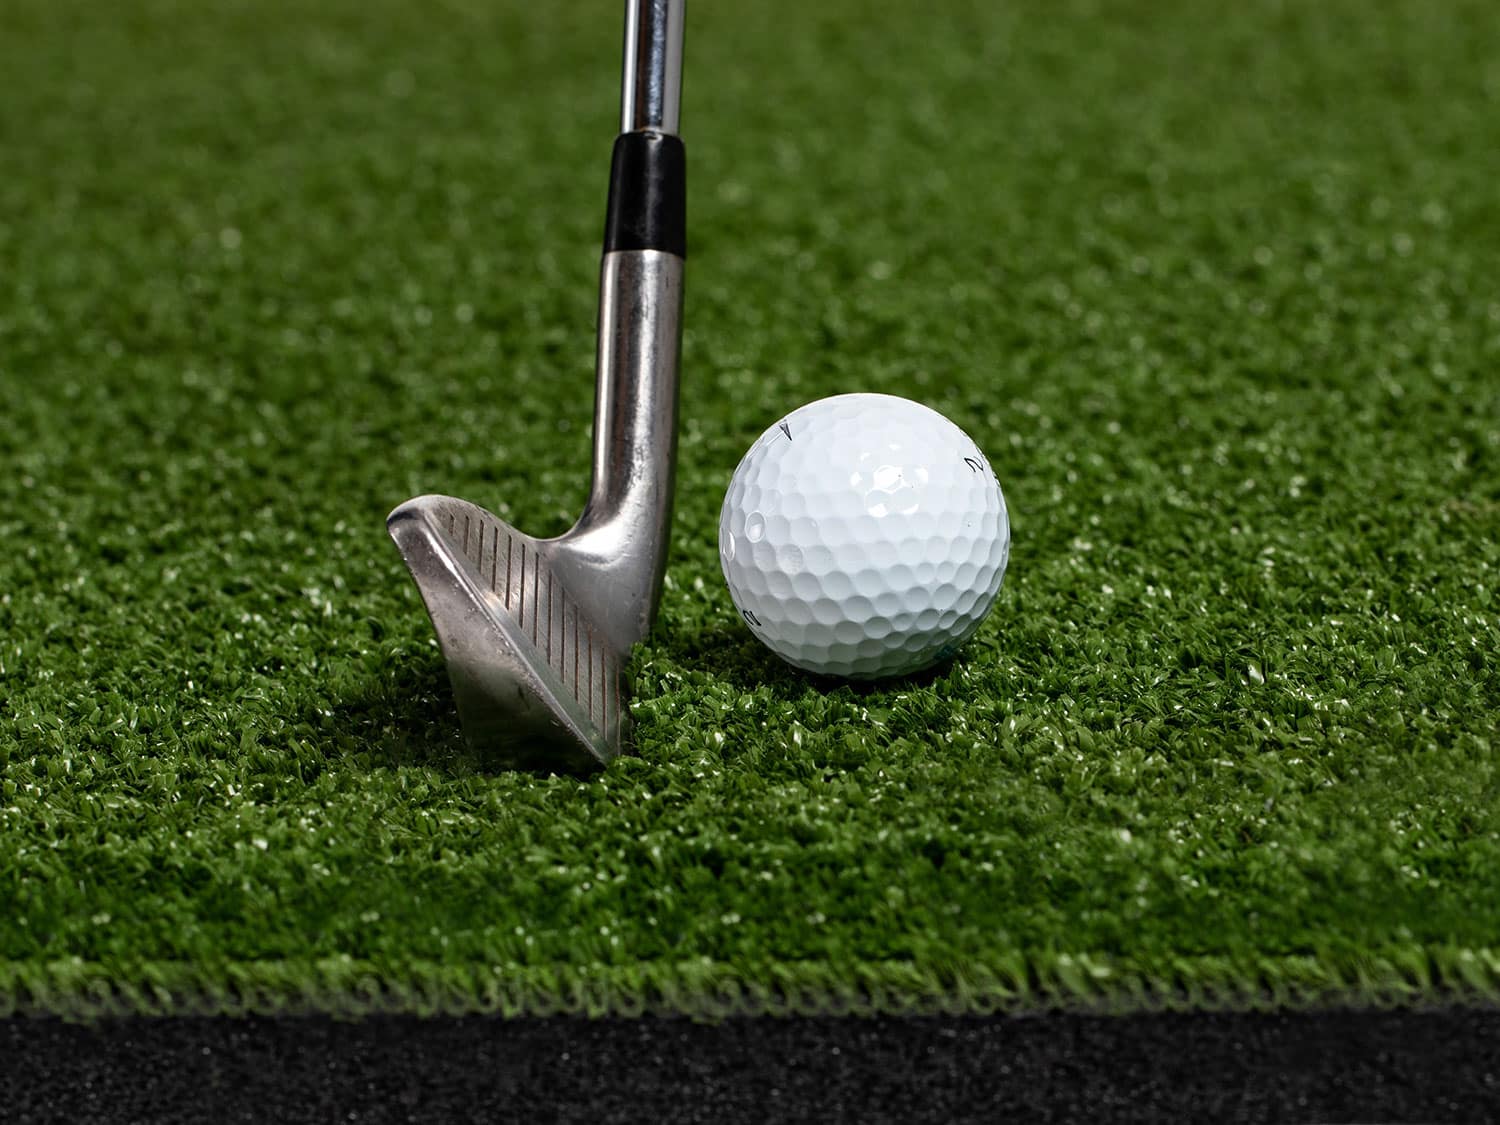 An up-close look at the Monster Mat golf practice aid.